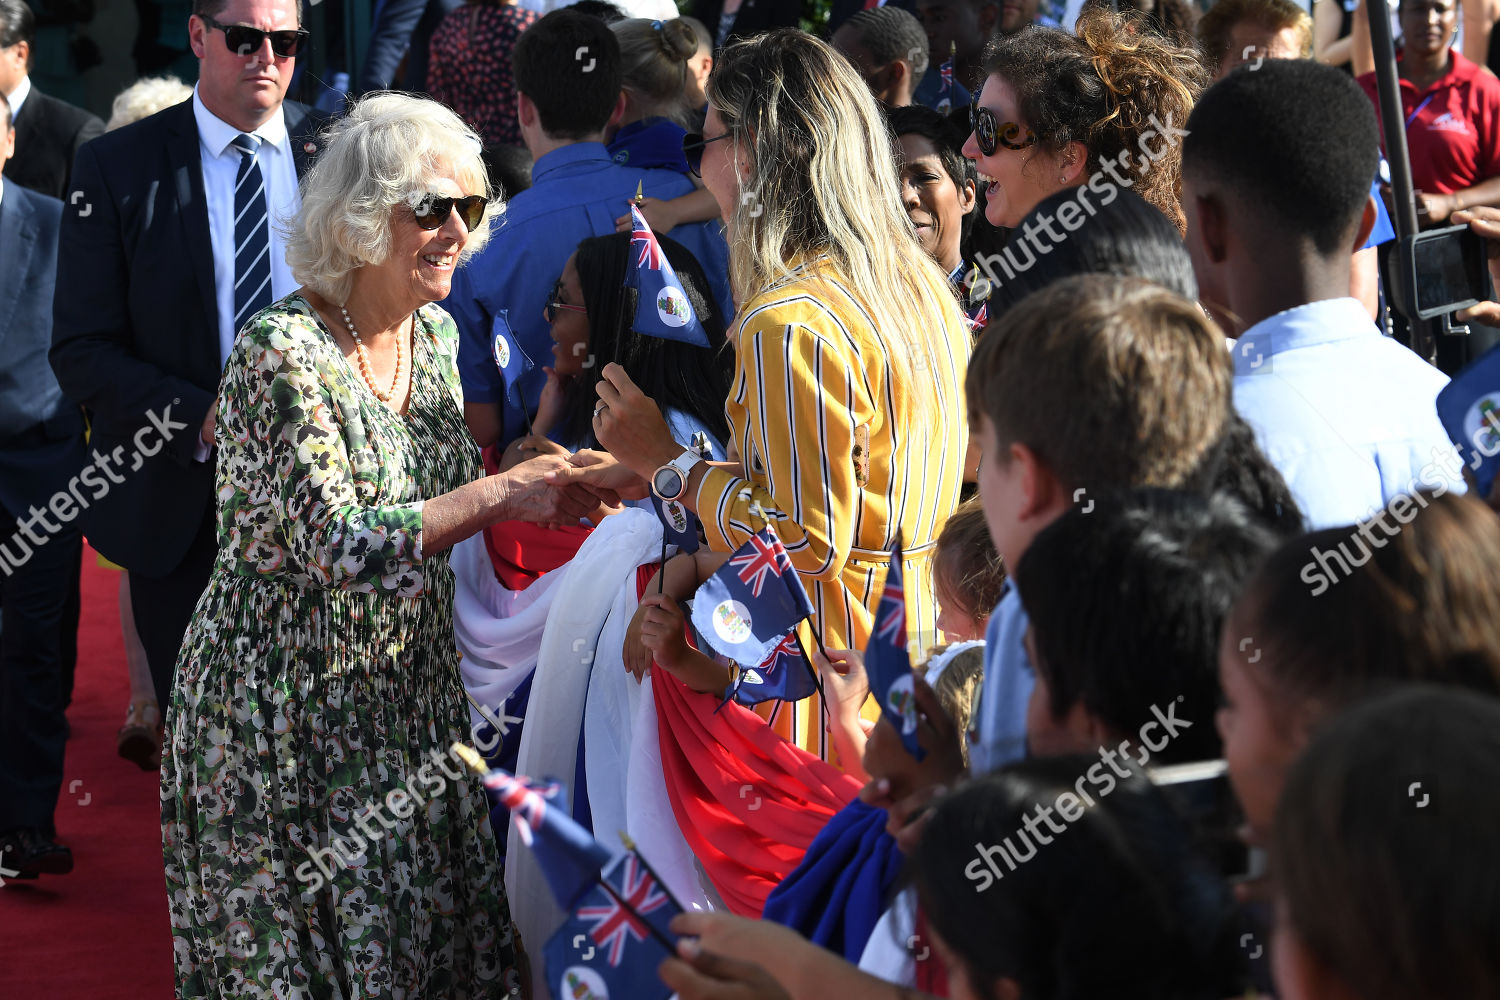 prince-charles-and-camilla-duchess-of-cornwall-caribbean-tour-cayman-islands-shutterstock-editorial-10180229ac.jpg